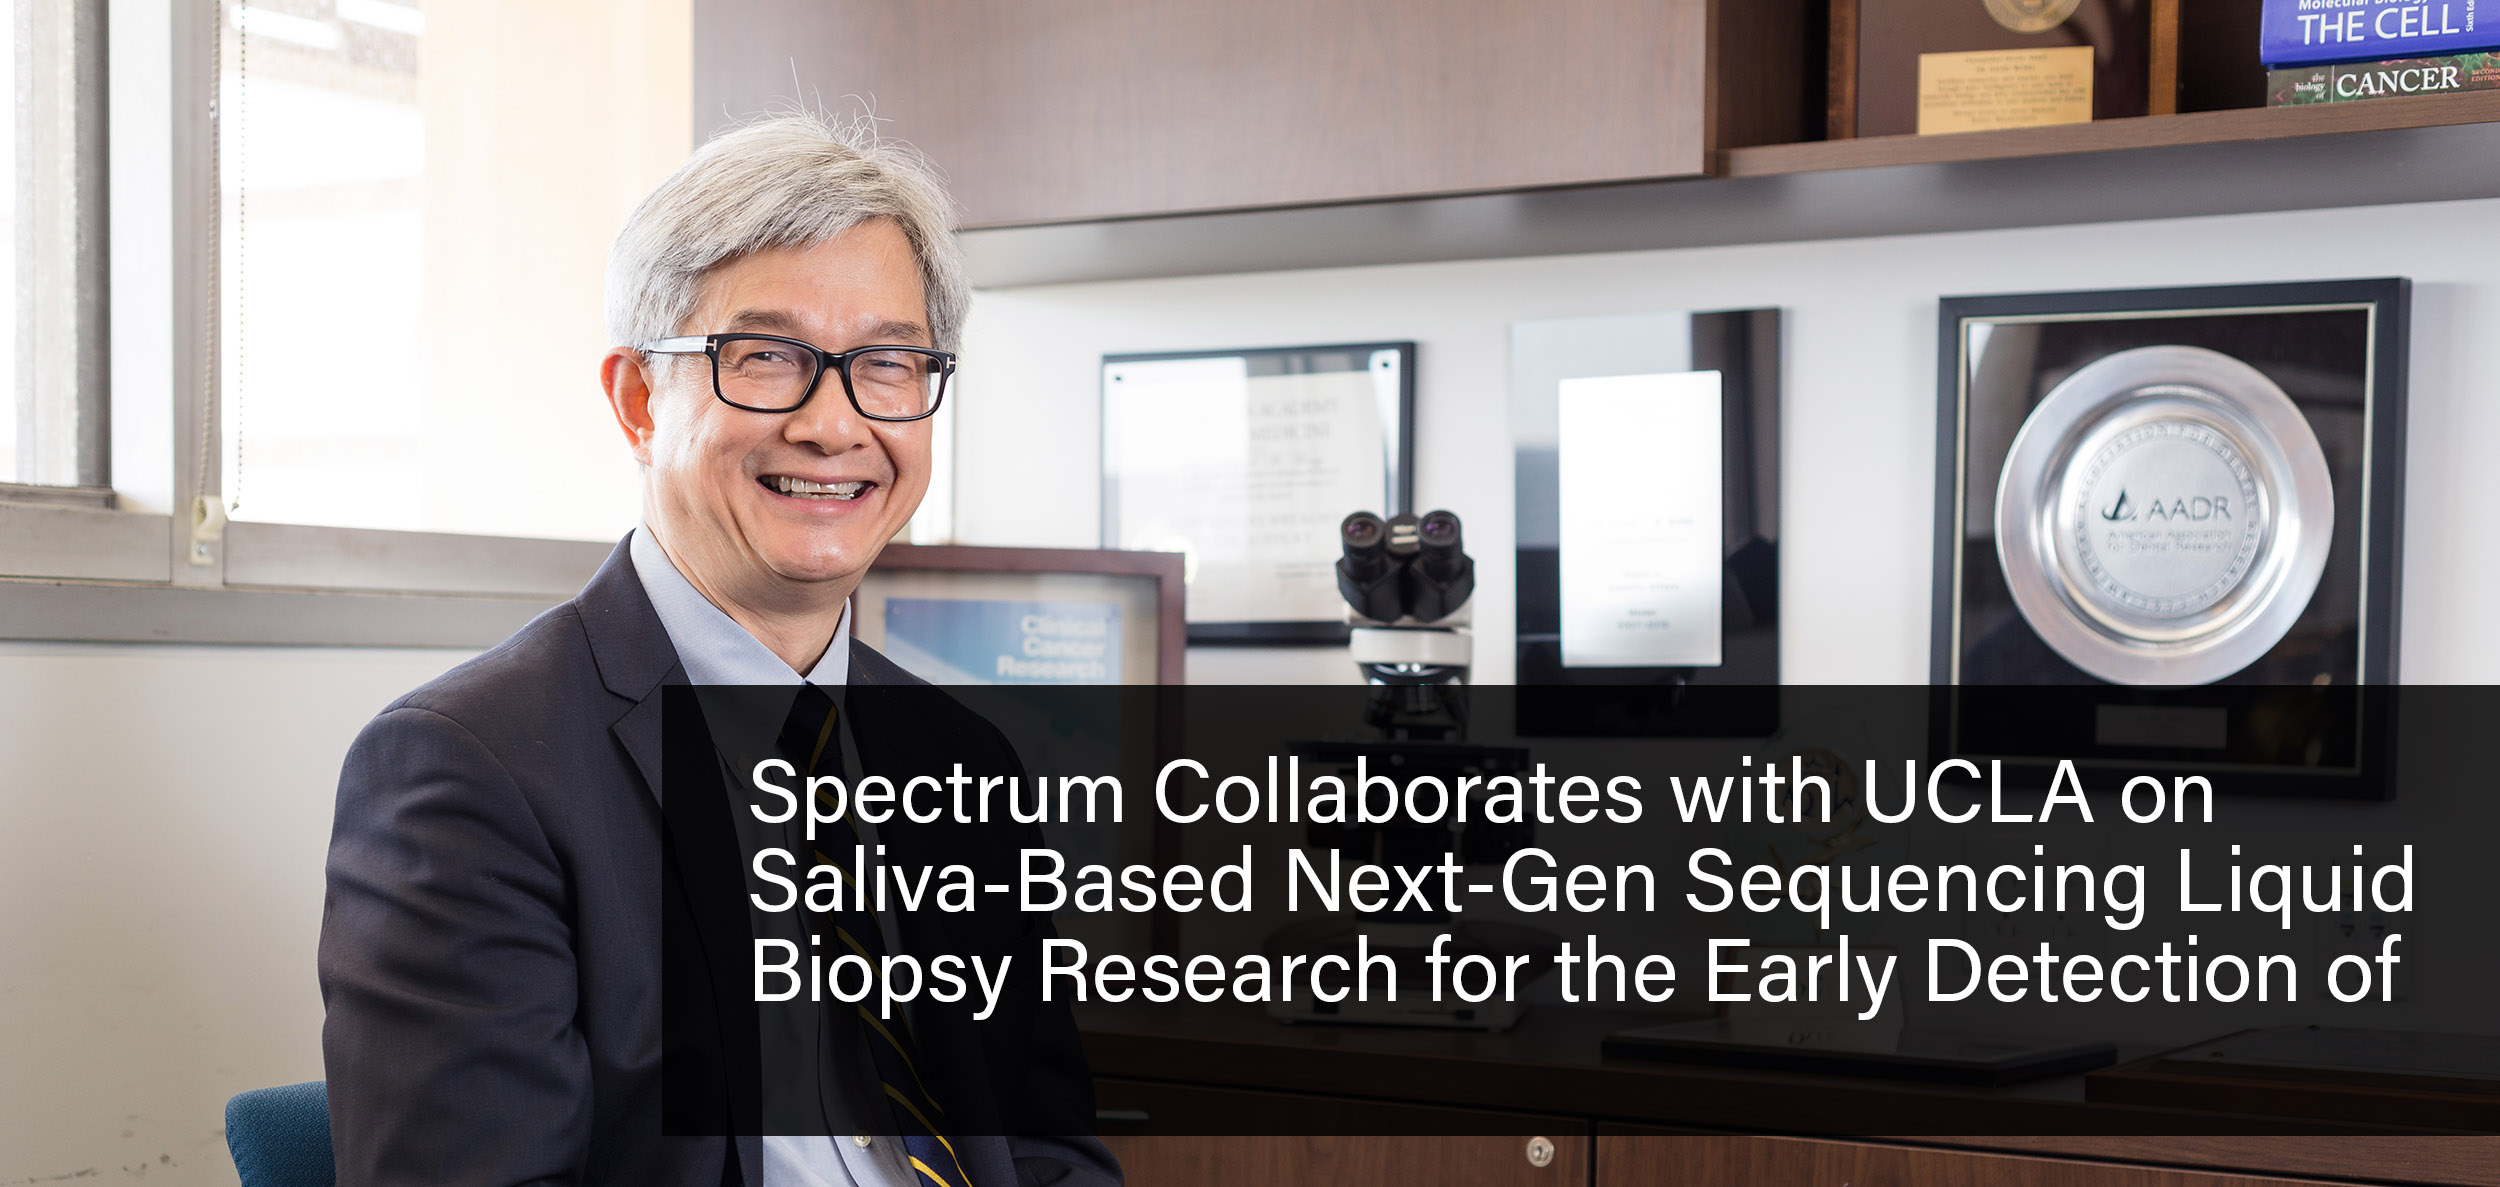 Spectrum Solutions Collaborates with UCLA on Saliva-Based Next-Gen Sequencing (NGS) Liquid Biopsy Research for the Early Detection of Lung Cancer